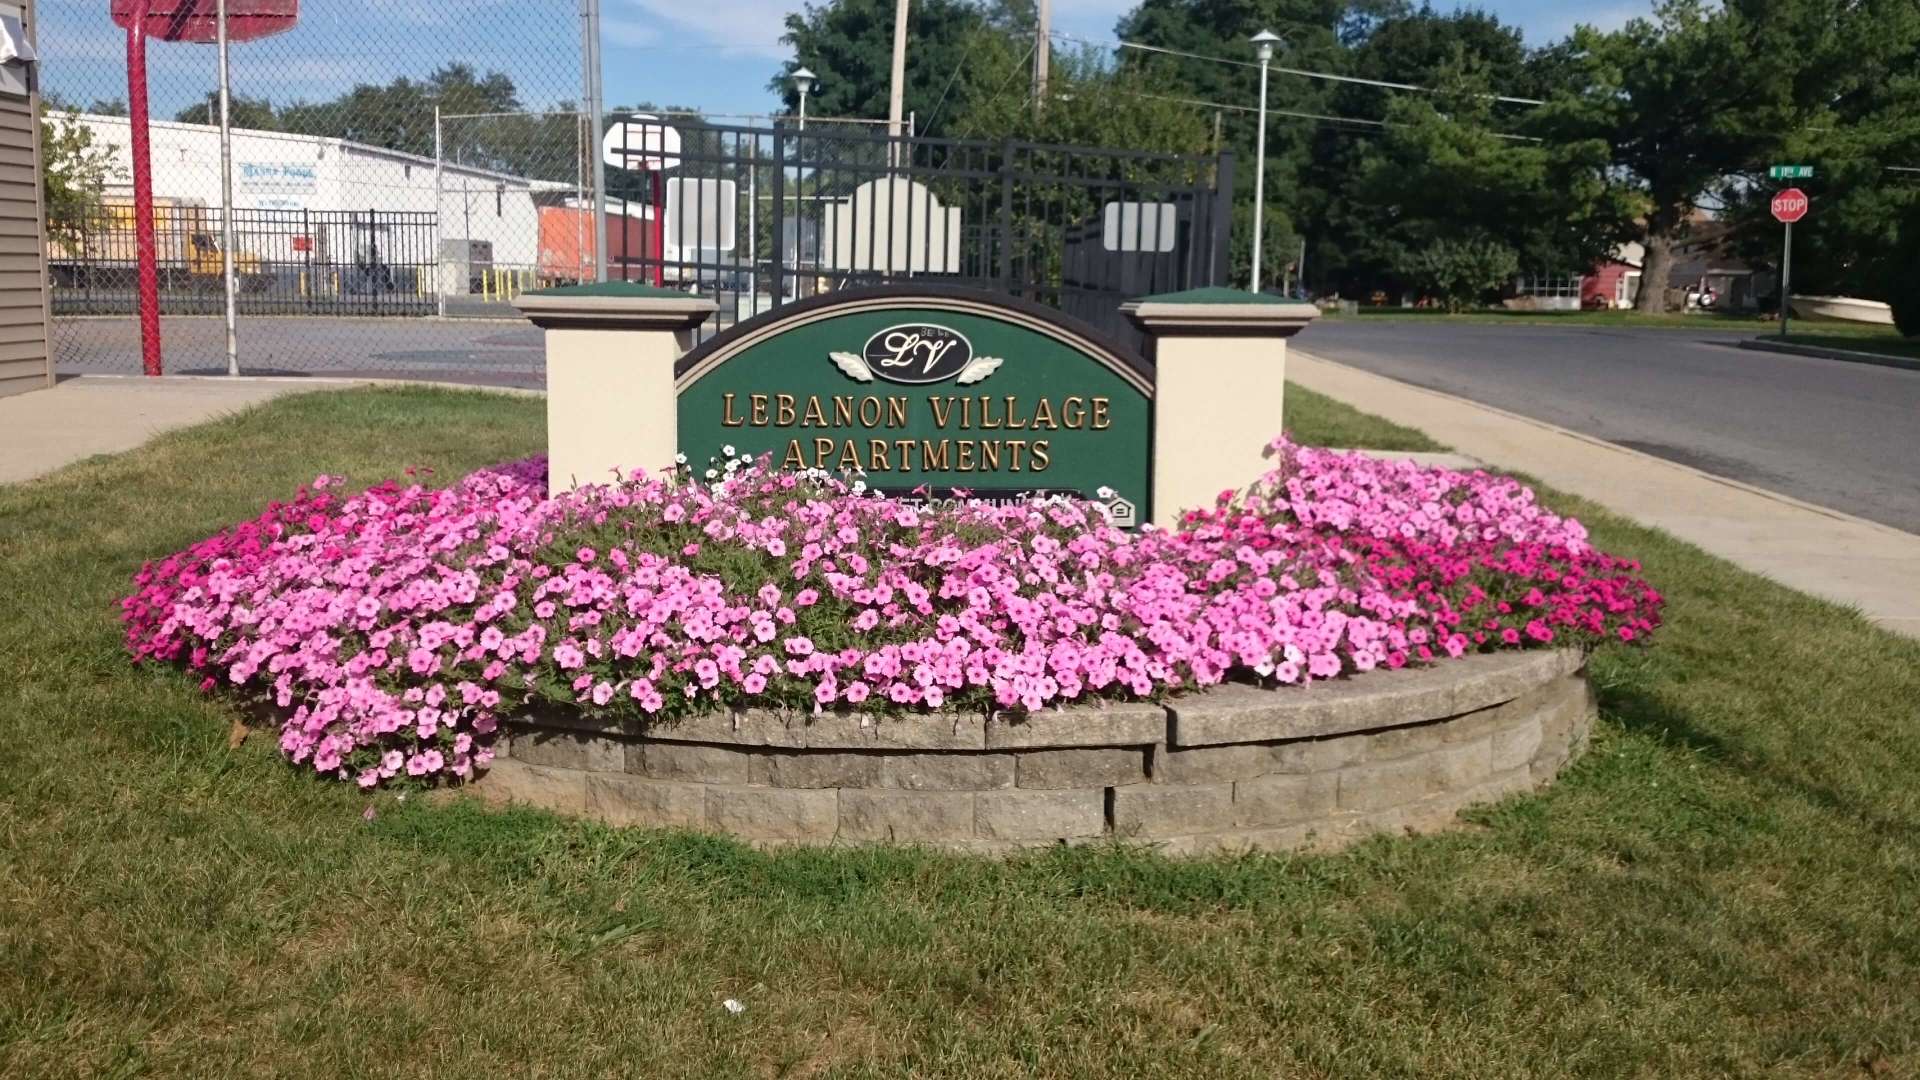 Lebanon Village Apartments — Front Sign in PA